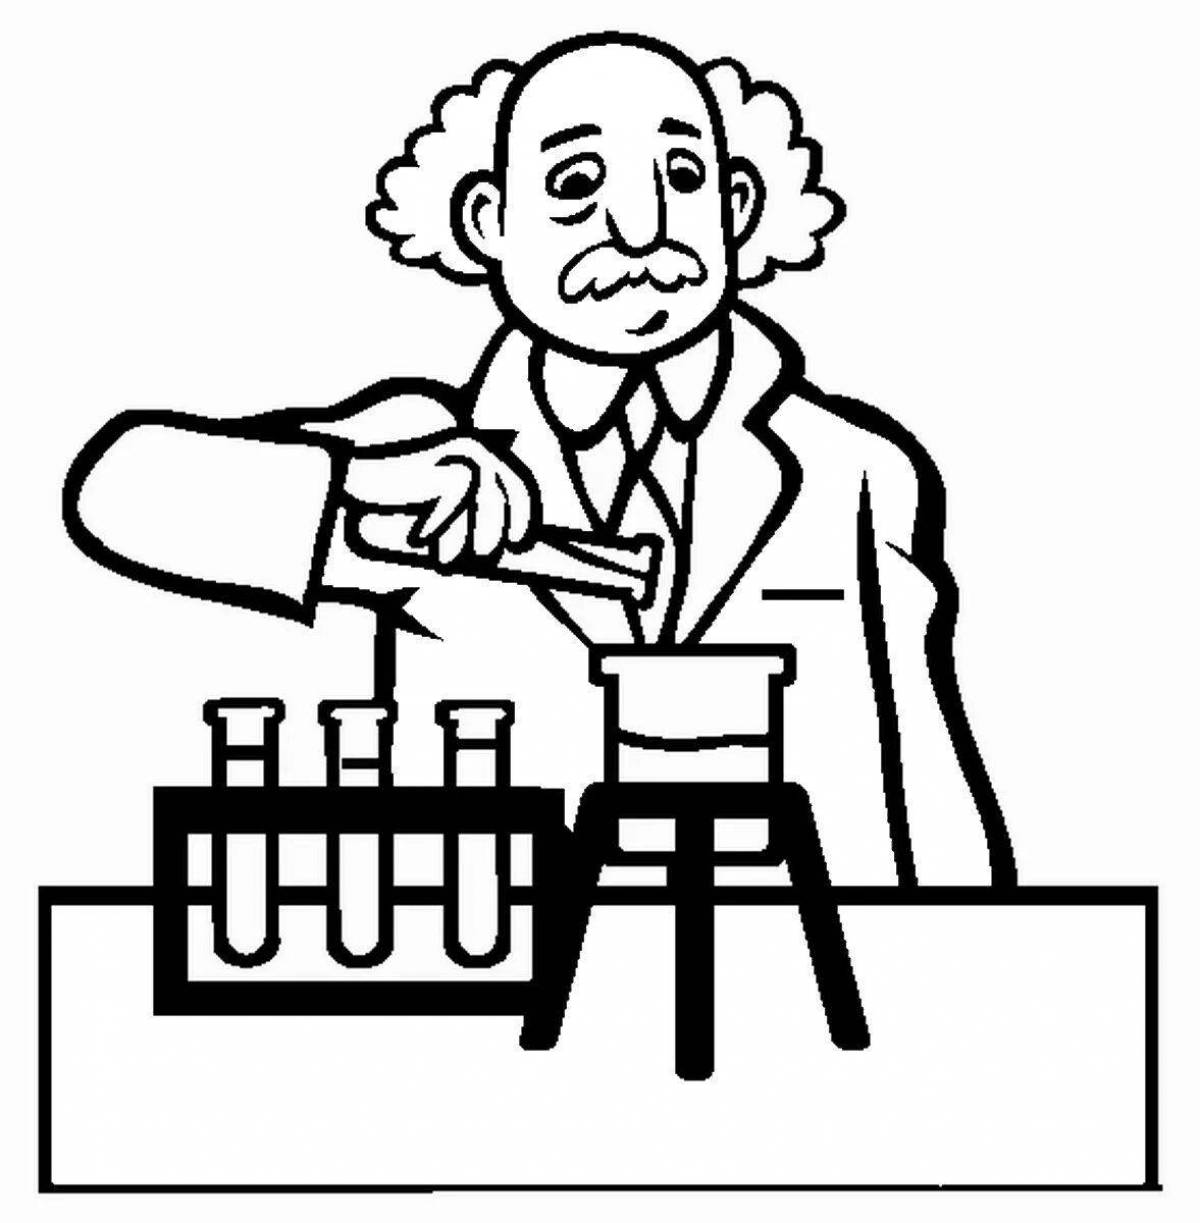 Fun scientist coloring pages for kids